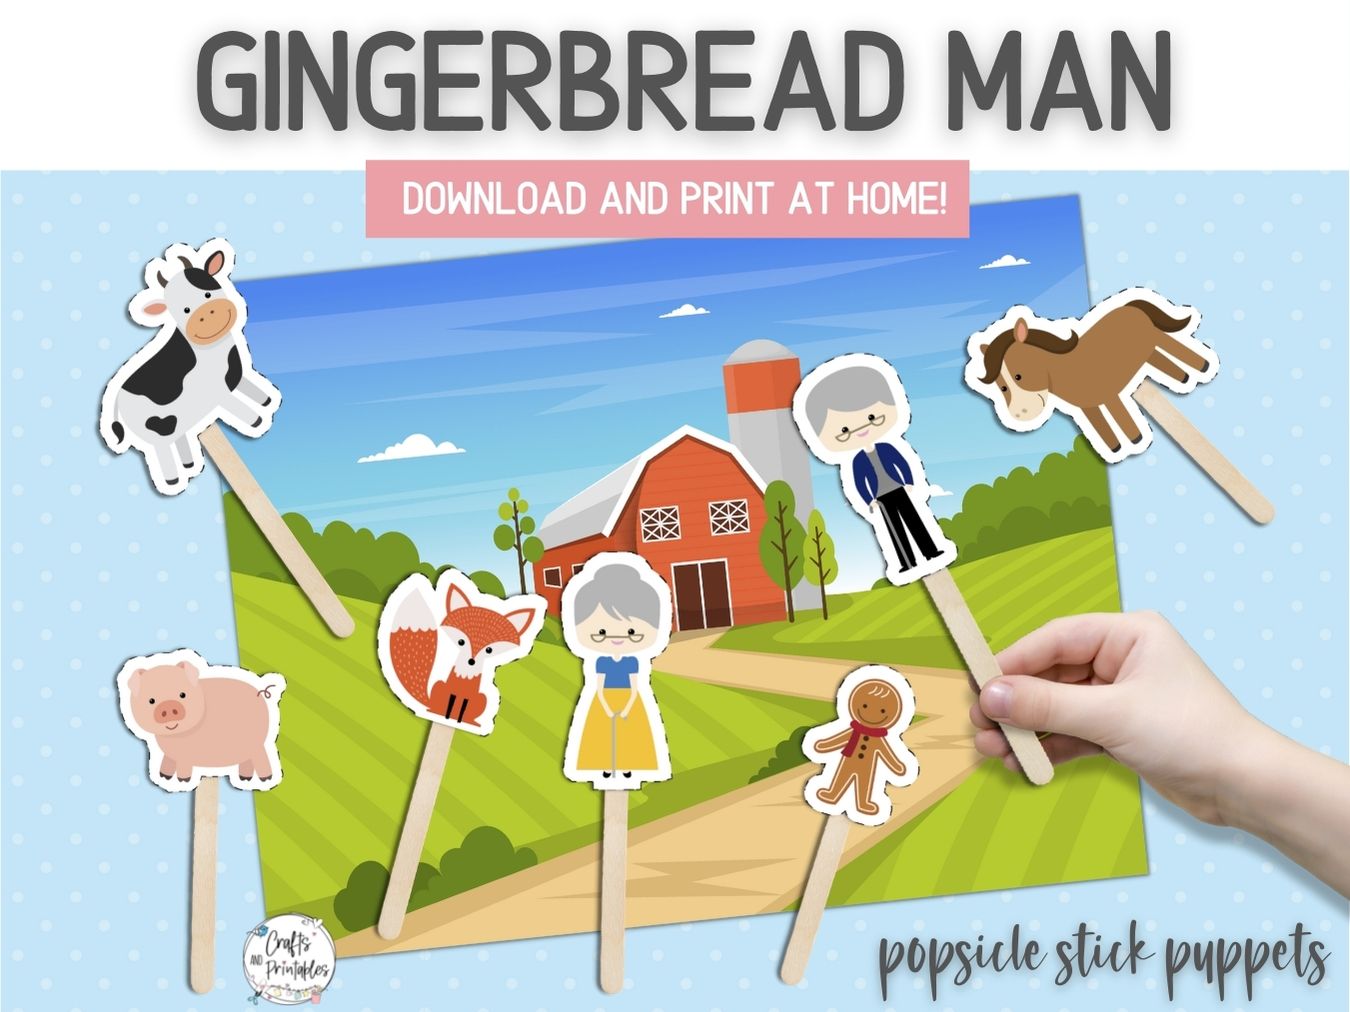 gingerbread-man-popsicle-stick-puppets-printable-crafts-and